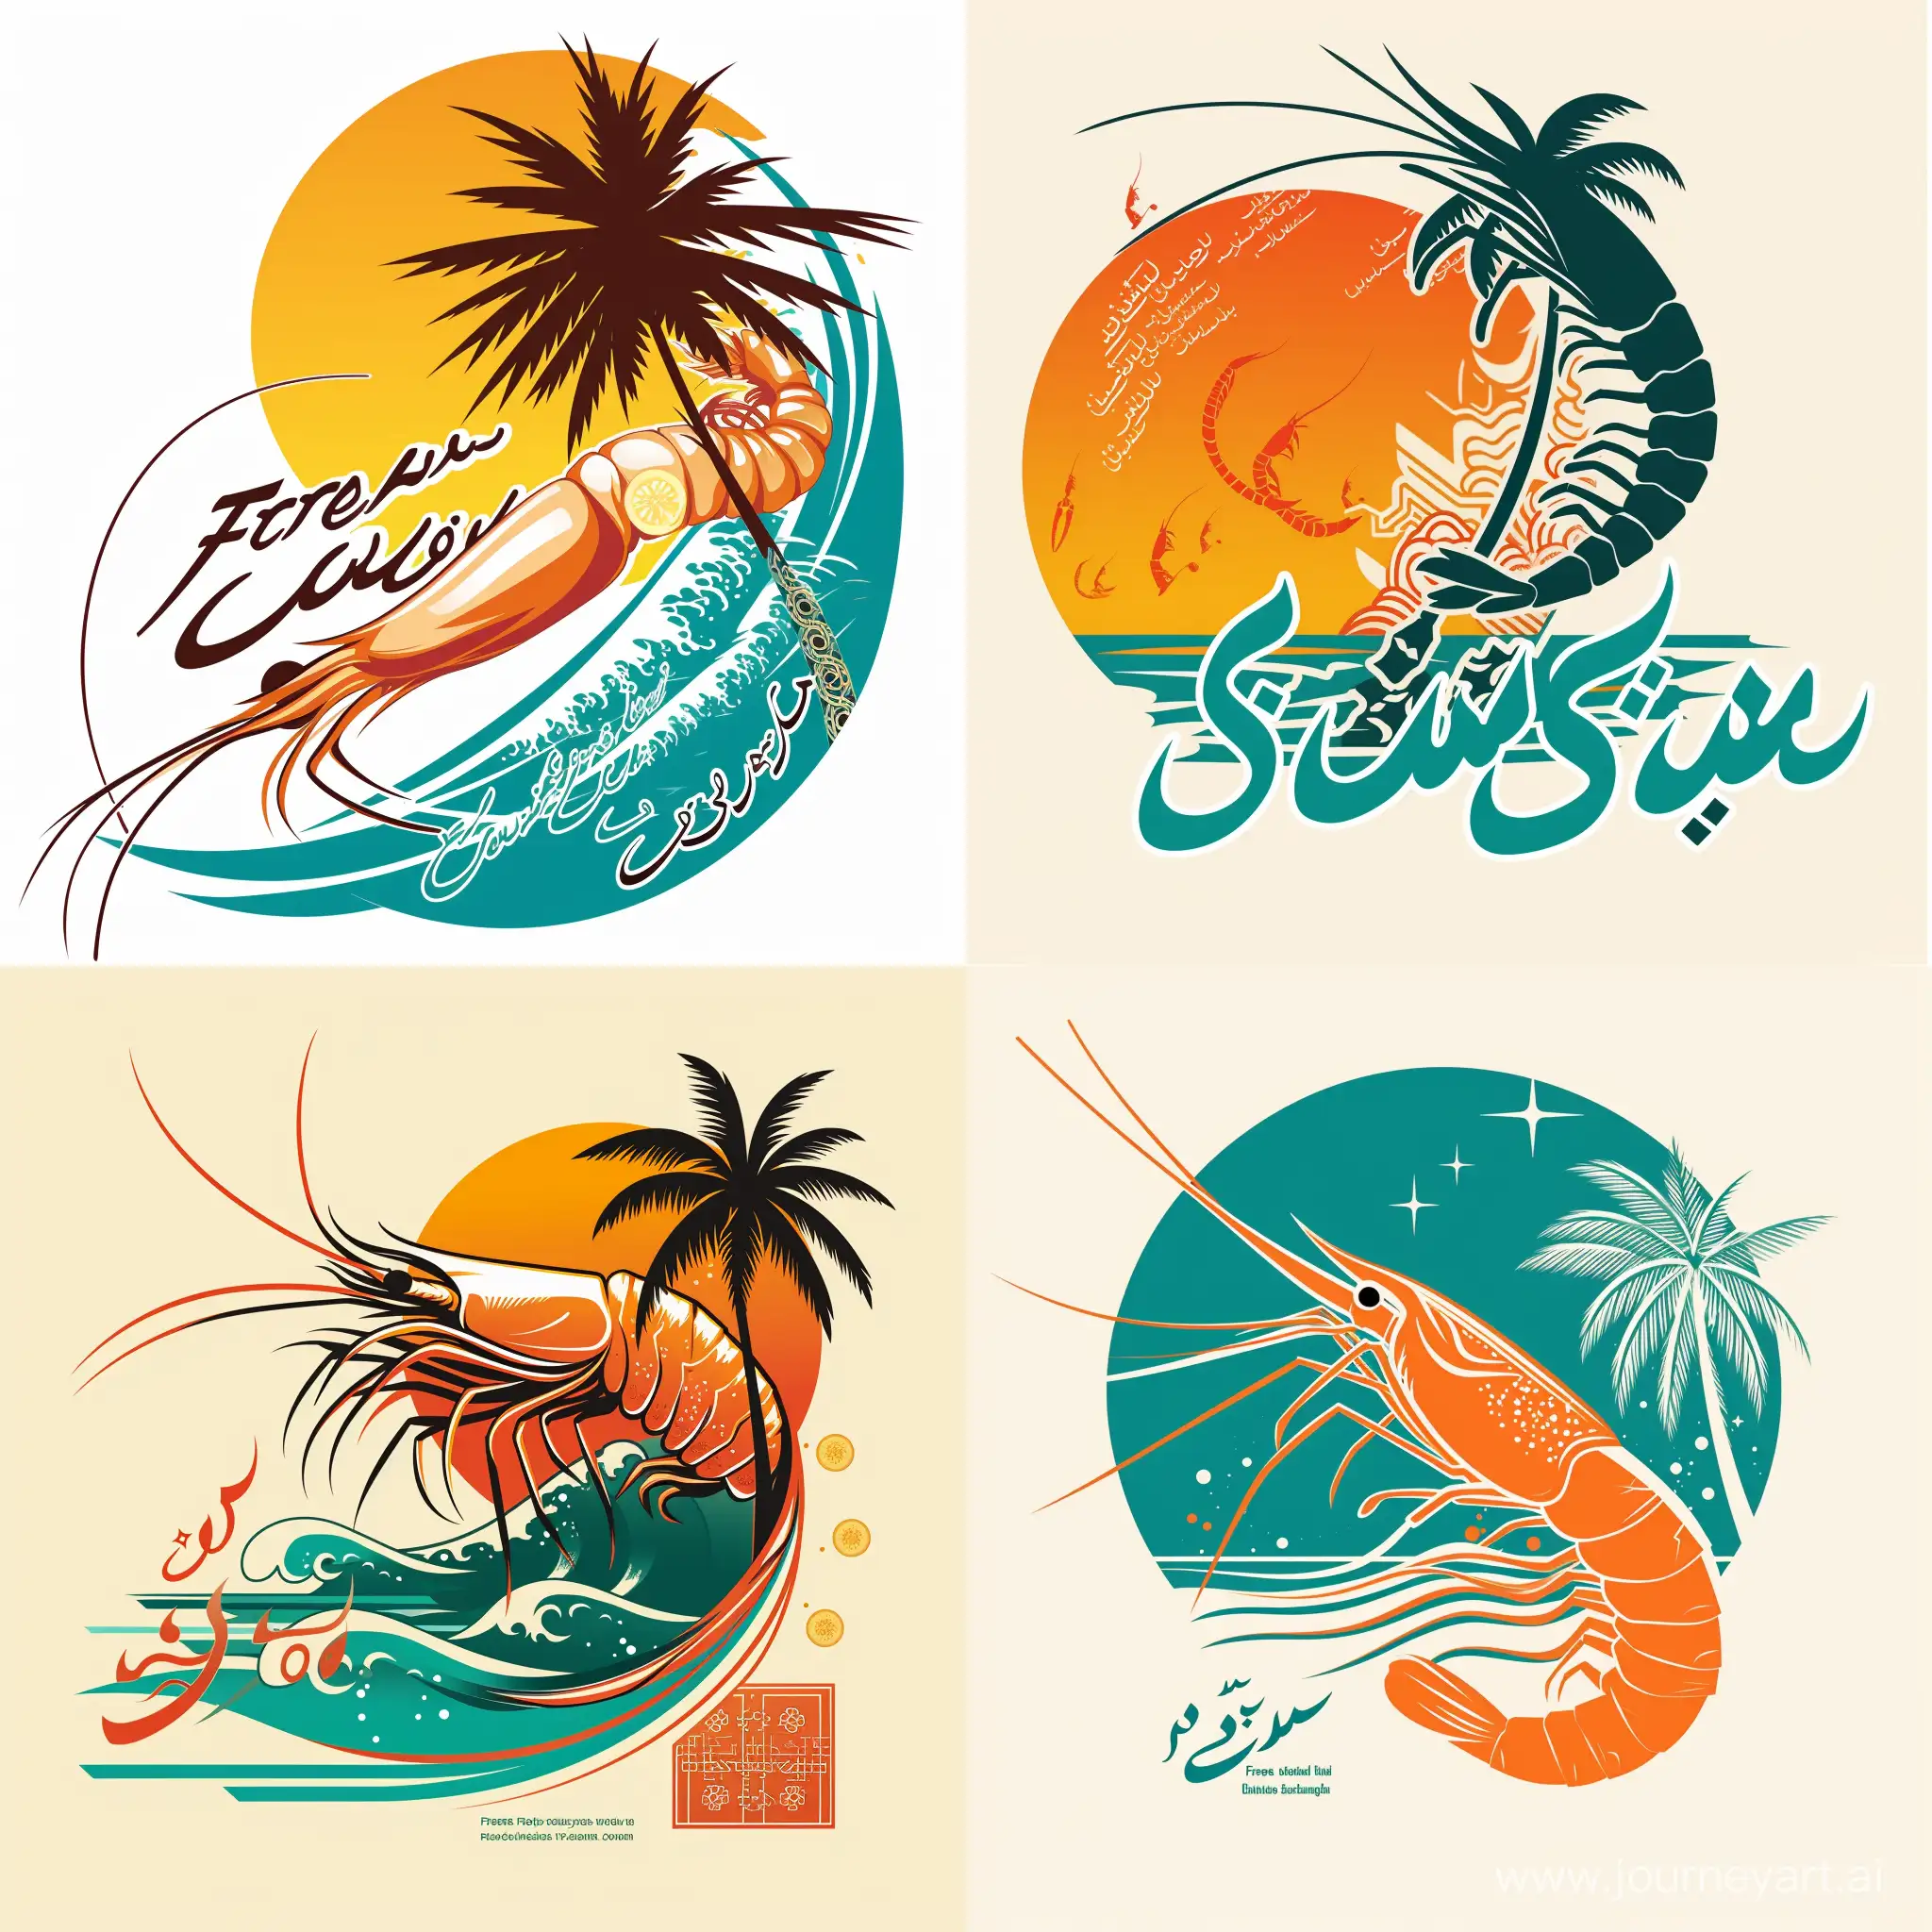 ## Shrimp Growing Company Logo Design: South of Iran

Here are some logo concepts for your shrimp growing company in the south of Iran, incorporating elements specific to your region:

**Concept 1: Playful Shrimp**

* **Image:** A stylized shrimp with long, flowing antennae, reminiscent of Persian calligraphy.
* **Colors:** Turquoise (representing the Persian Gulf), orange (for shrimp), and white (for purity and quality).
* **Font:** A modern, yet elegant typeface in English and Farsi.
* **Tagline (optional):** "From the South with Love" (in English and Farsi)

**Concept 2: Coastal Landscape**

* **Image:** A silhouette of a palm tree against a setting sun, with waves and shrimp silhouettes in the background.
* **Colors:** Teal (representing the ocean), golden yellow (for sunset), and brown (for the palm tree).
* **Font:** A bold, serif typeface in English and Farsi.
* **Tagline (optional):** "Fresh Shrimp, Southern Charm" (in English and Farsi)

**Concept 3: Persian Motif**

* **Image:** A geometric pattern inspired by Persian tilework, incorporating shrimp shapes.
* **Colors:** Vibrant jewel tones like turquoise, ruby red, and emerald green.
* **Font:** A decorative, calligraphic typeface in Farsi only.
* **Tagline (optional):** "Taste the Tradition" (in Farsi)

**Additional considerations:**

* **Company name:** Incorporate the company name into the logo design prominently.
* **Target audience:** Consider the design aesthetic that would resonate with your target audience.
* **Versatility:** Ensure the logo works well in various sizes and applications (digital and print).

**Remember:** These are just starting points. You can customize and combine these elements to create a logo that perfectly represents your company.

I recommend using a graphic design software or collaborating with a designer to bring your logo vision to life.